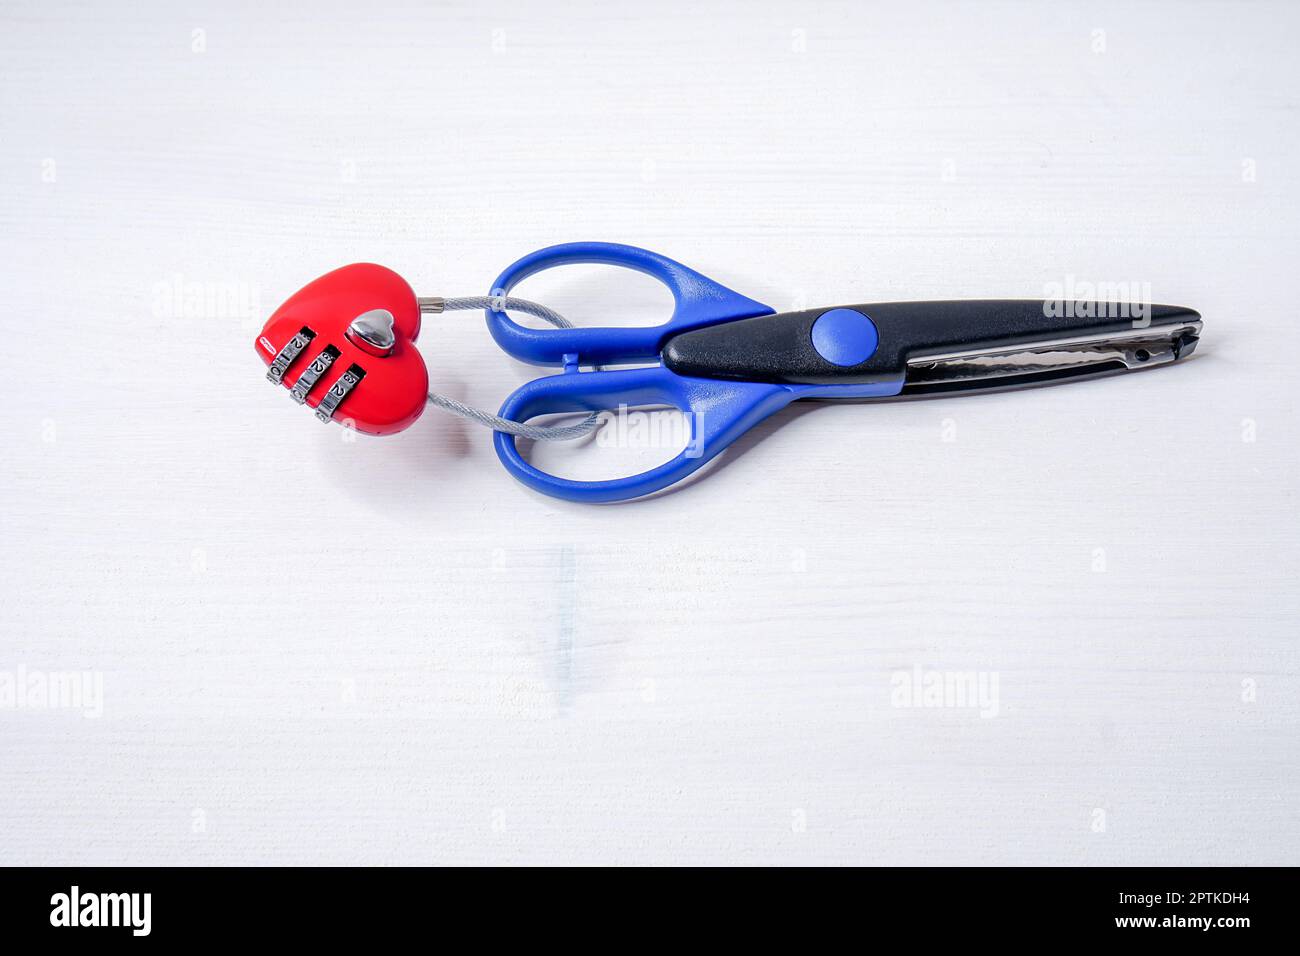 https://c8.alamy.com/comp/2PTKDH4/safety-in-the-home-or-child-safety-scissors-with-padlock-2PTKDH4.jpg